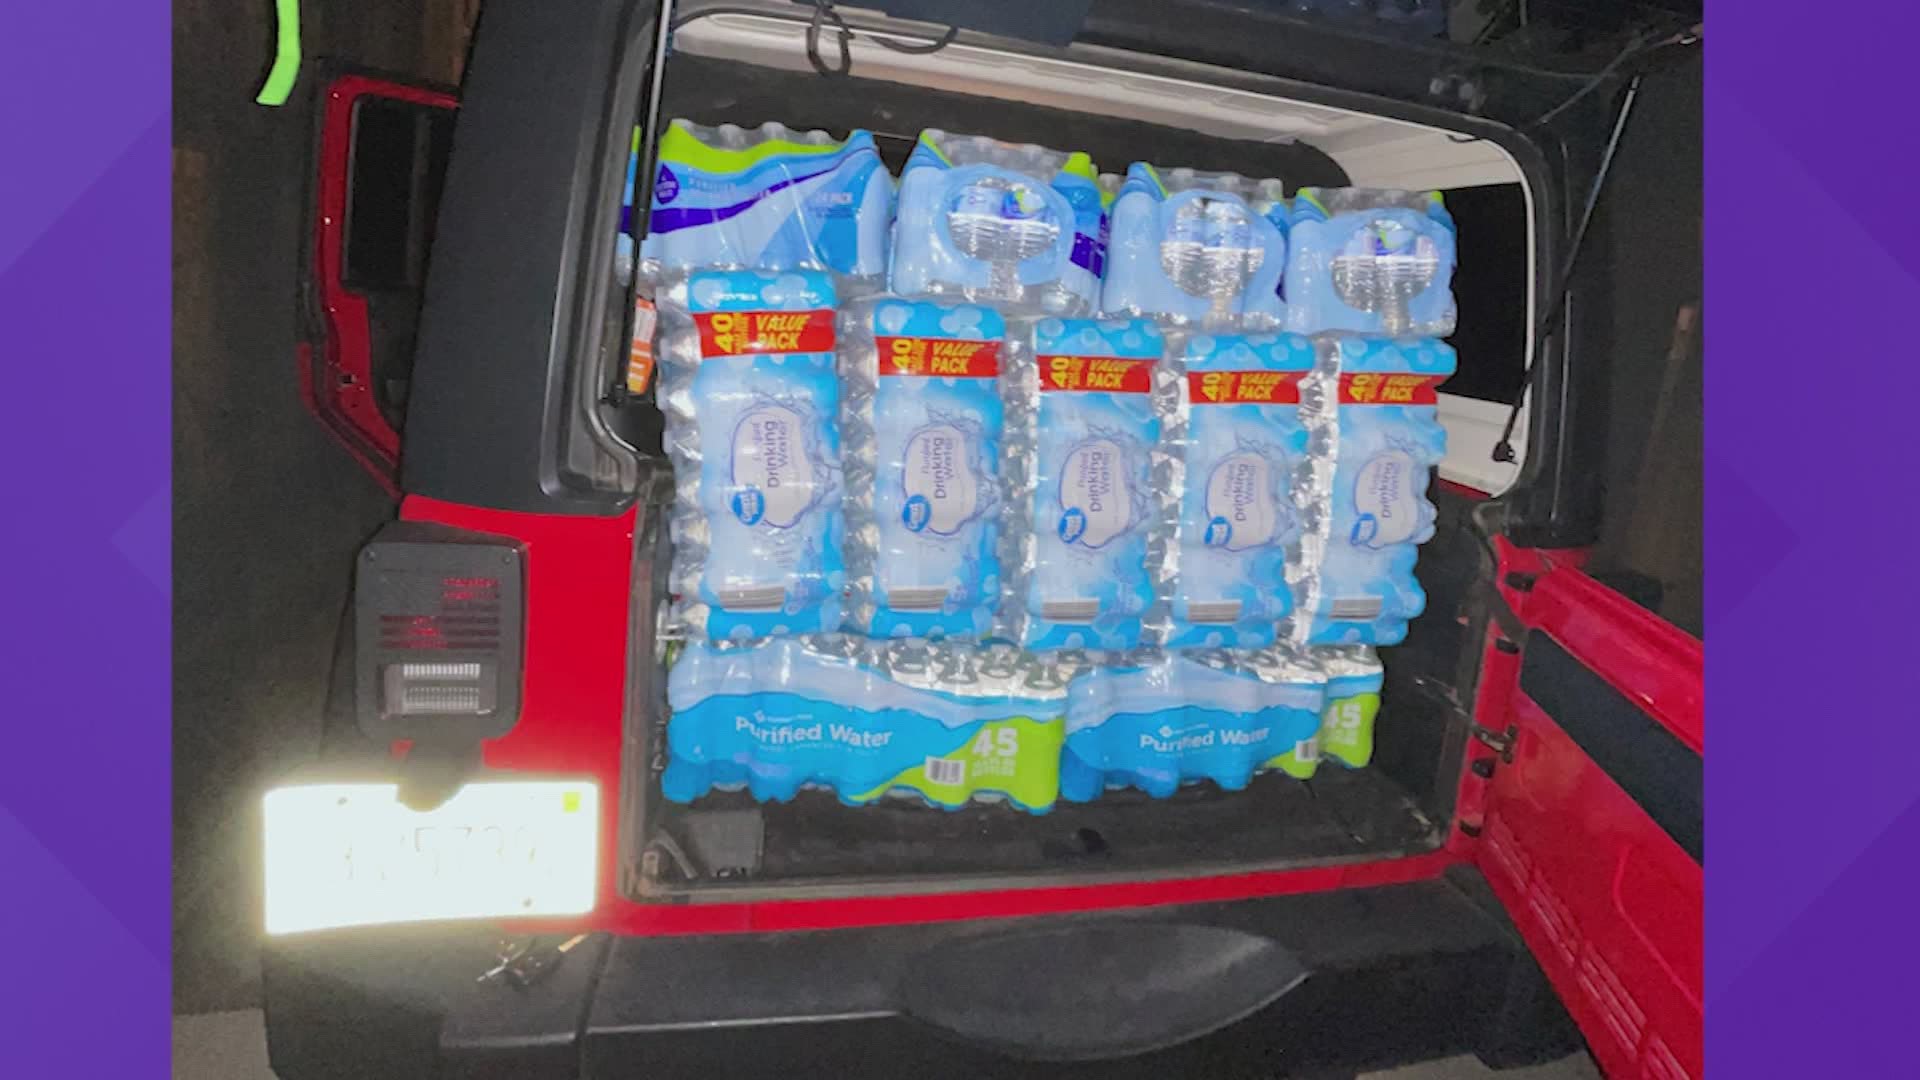 With a financial boost from family and friends, Adriane Kimbel drove about eight hours from Mississippi to Houston to deliver bottled water to those in need.